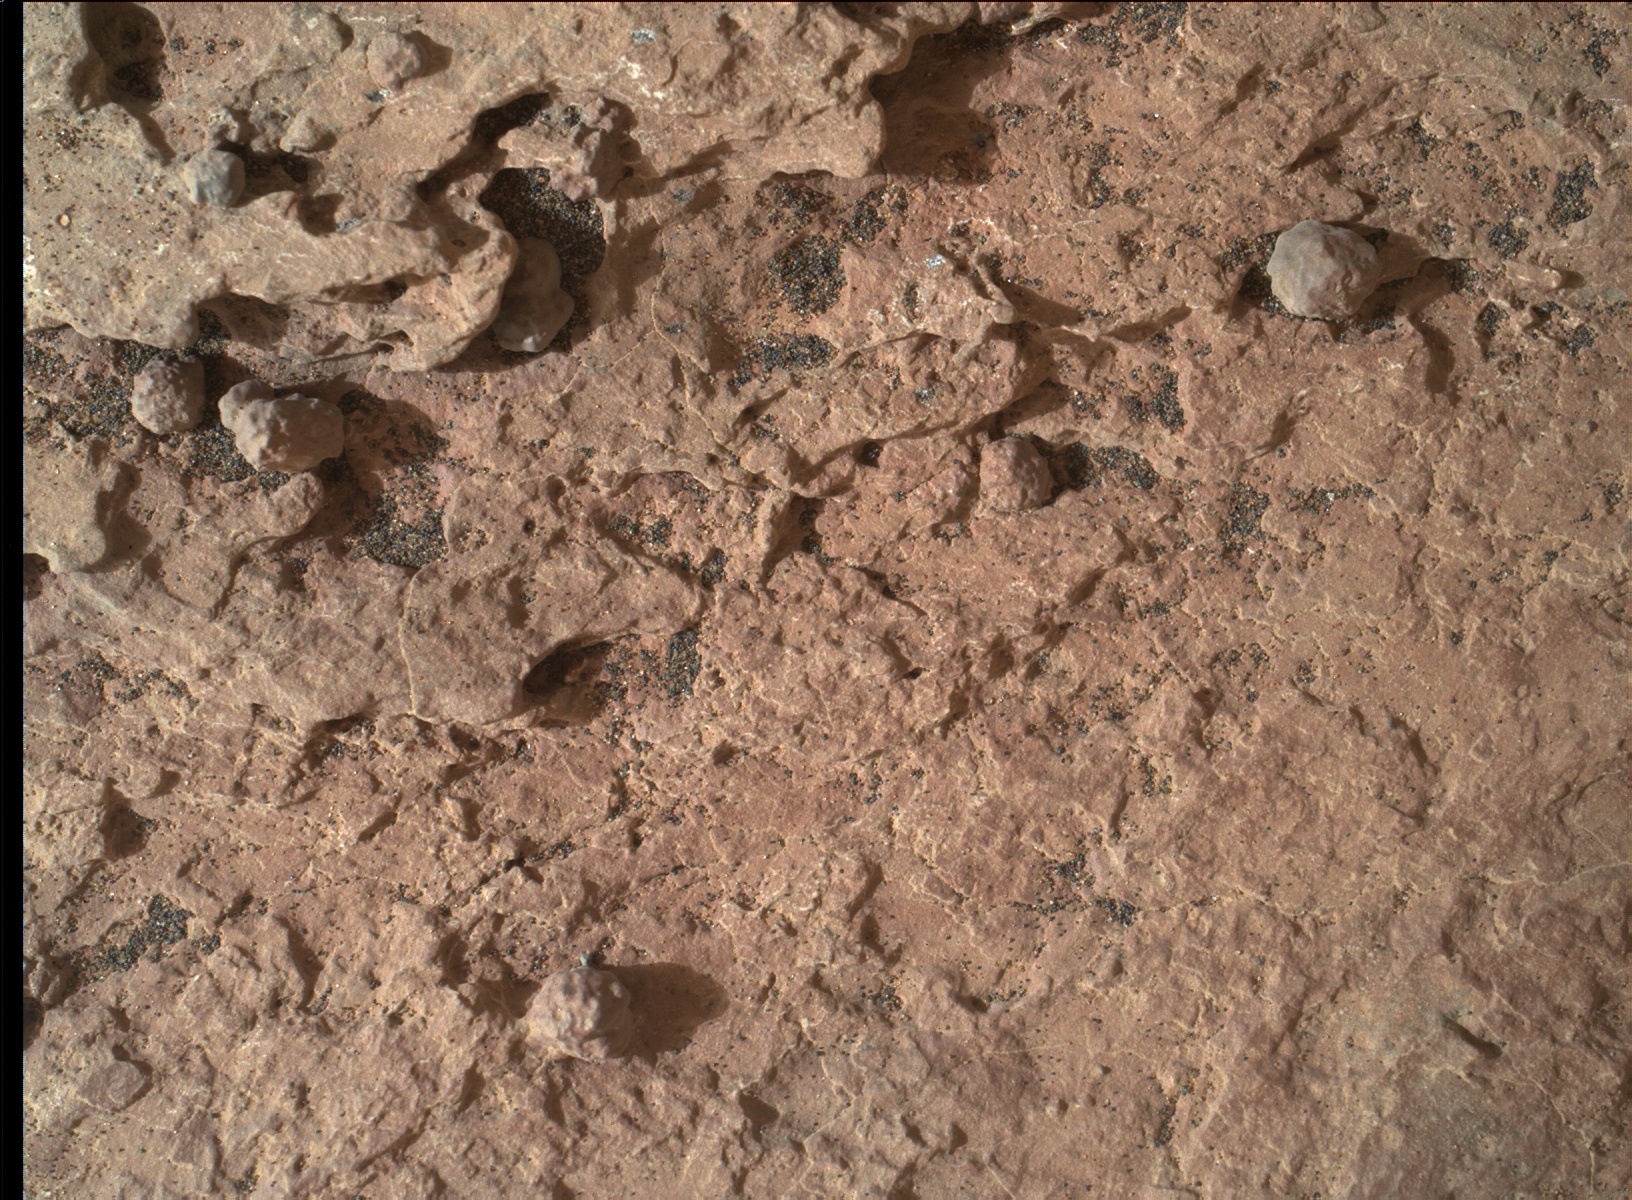 Nasa's Mars rover Curiosity acquired this image using its Mars Hand Lens Imager (MAHLI) on Sol 1614